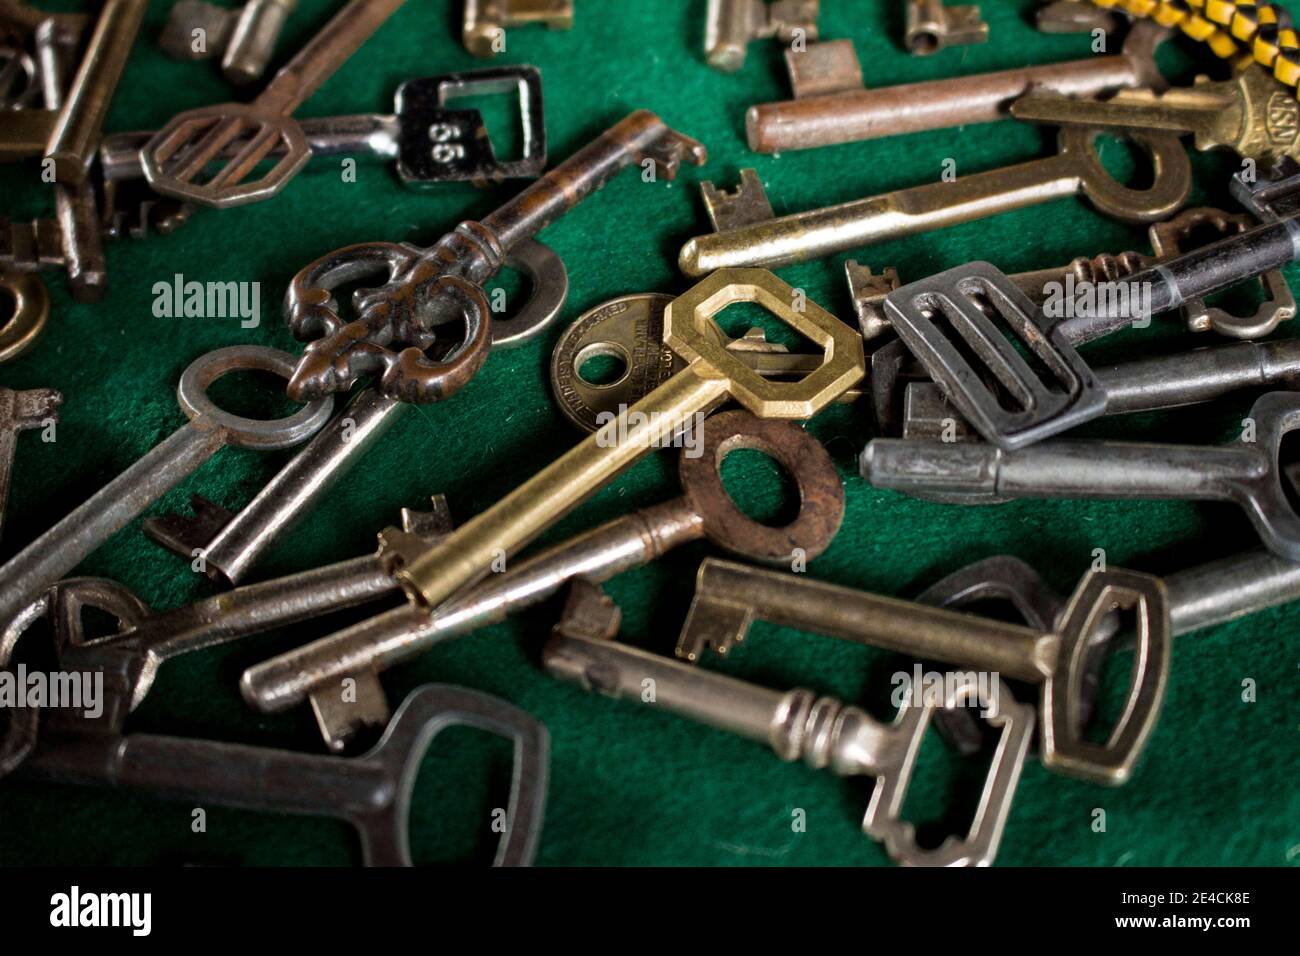 Sao Paulo / Sao Paulo / Brazil - 08 19 2018: Group of different old antique keys together. It seems to be a flea market or an old factory of door open Stock Photo